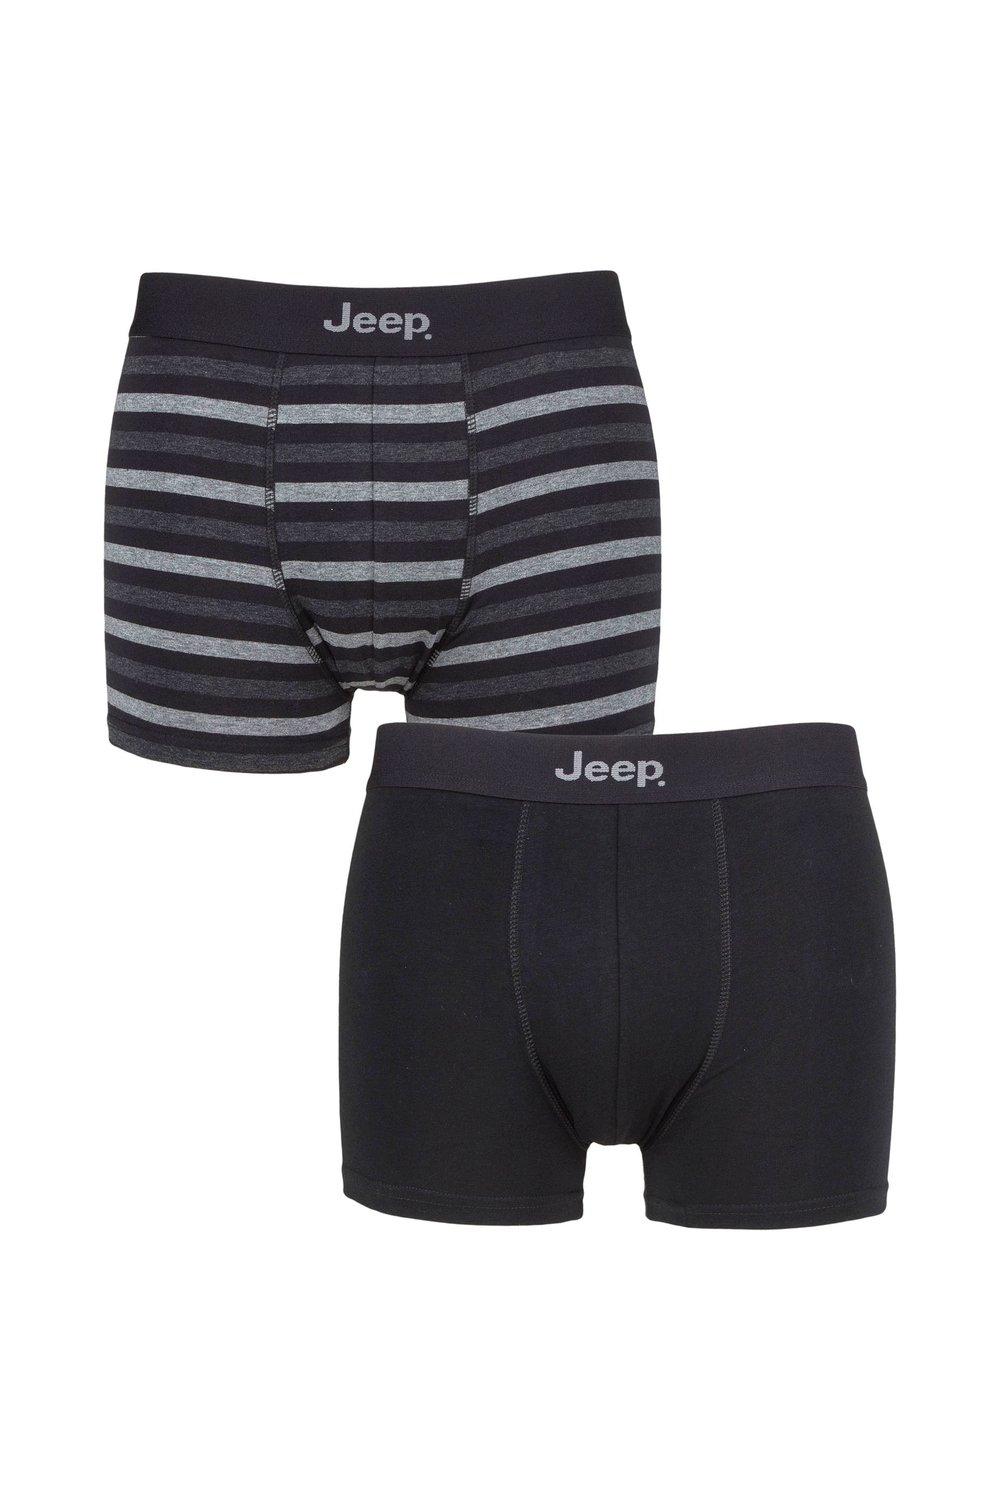 2 Pack Plain and Striped Fitted Trunks